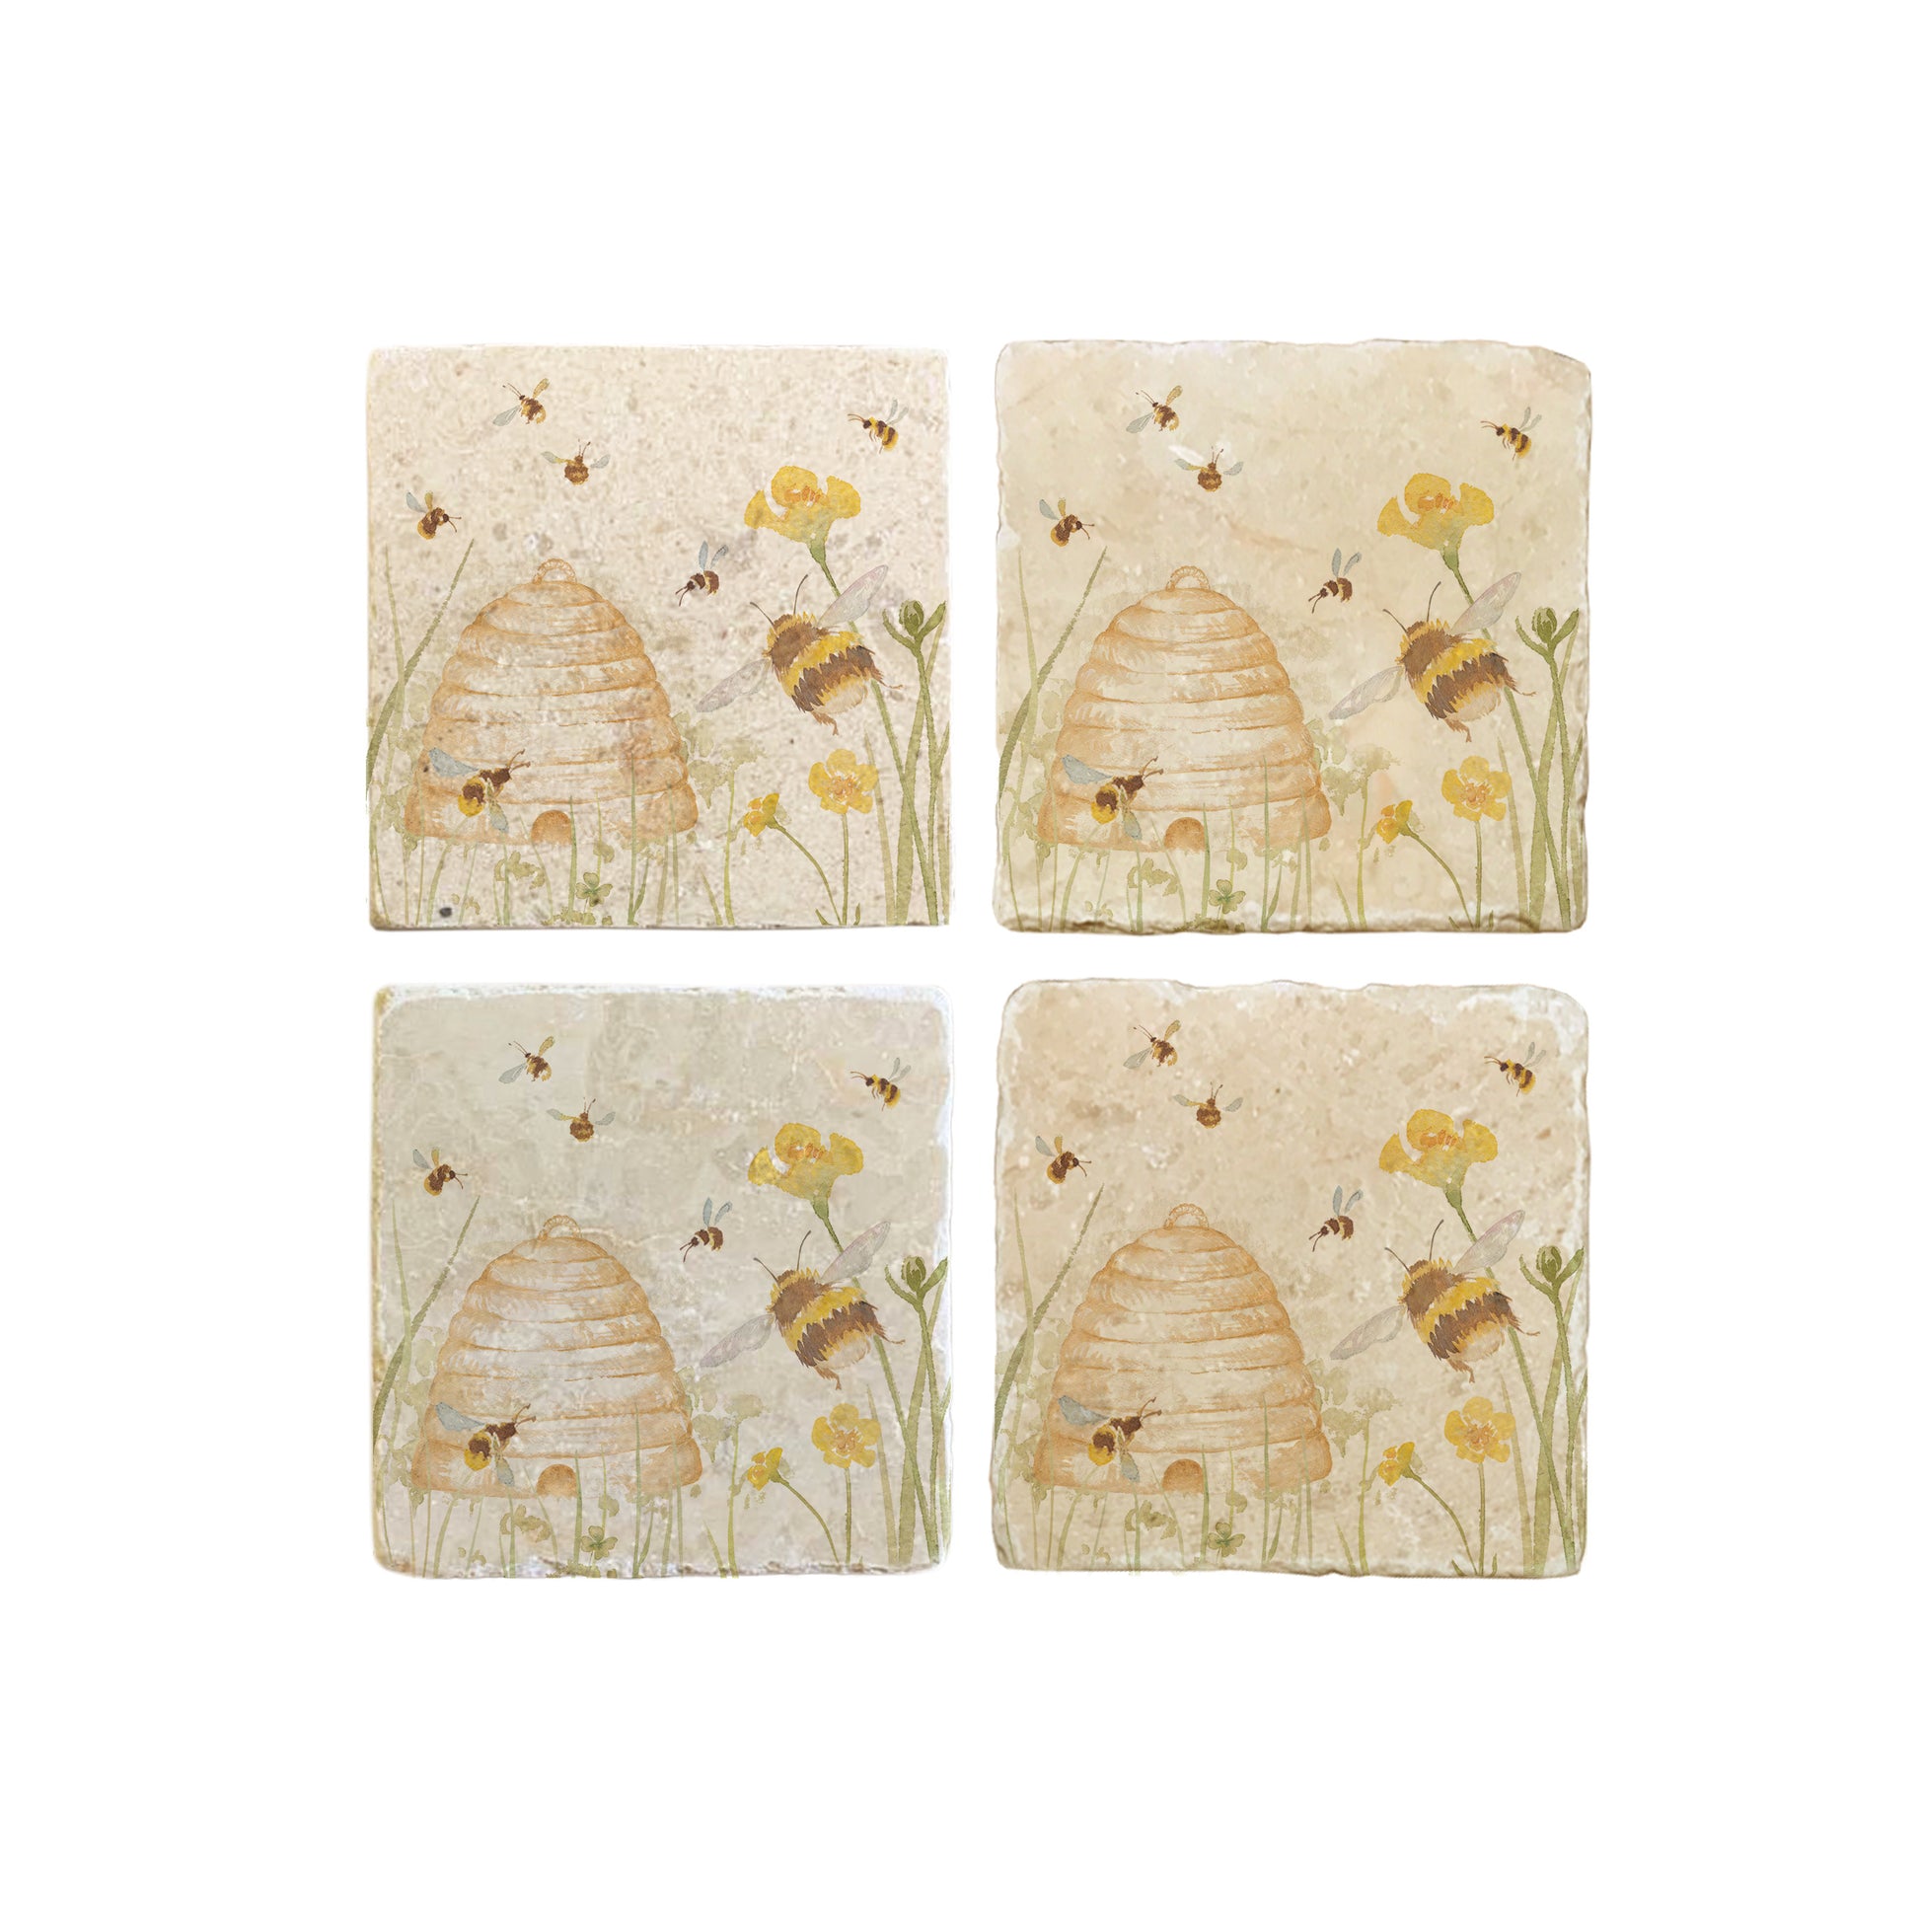 A set of 4 square marble coasters, featuring a watercolour design of bees and a beehive in a buttercup meadow.